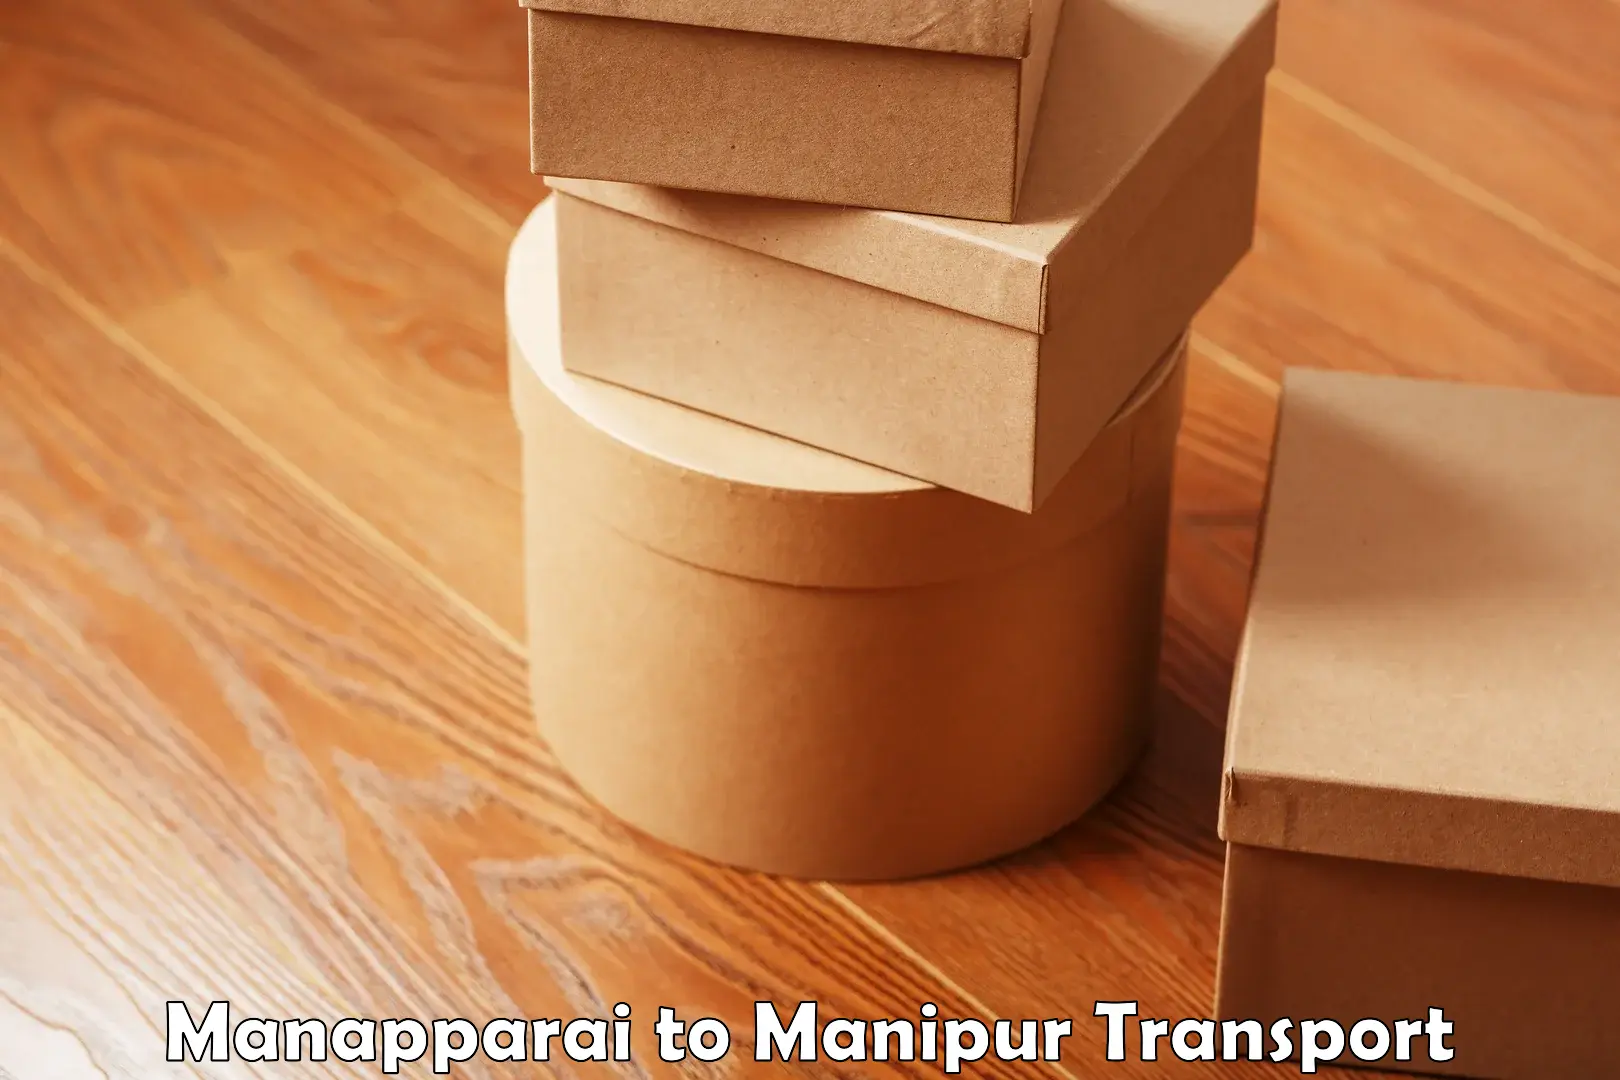 Pick up transport service Manapparai to Manipur